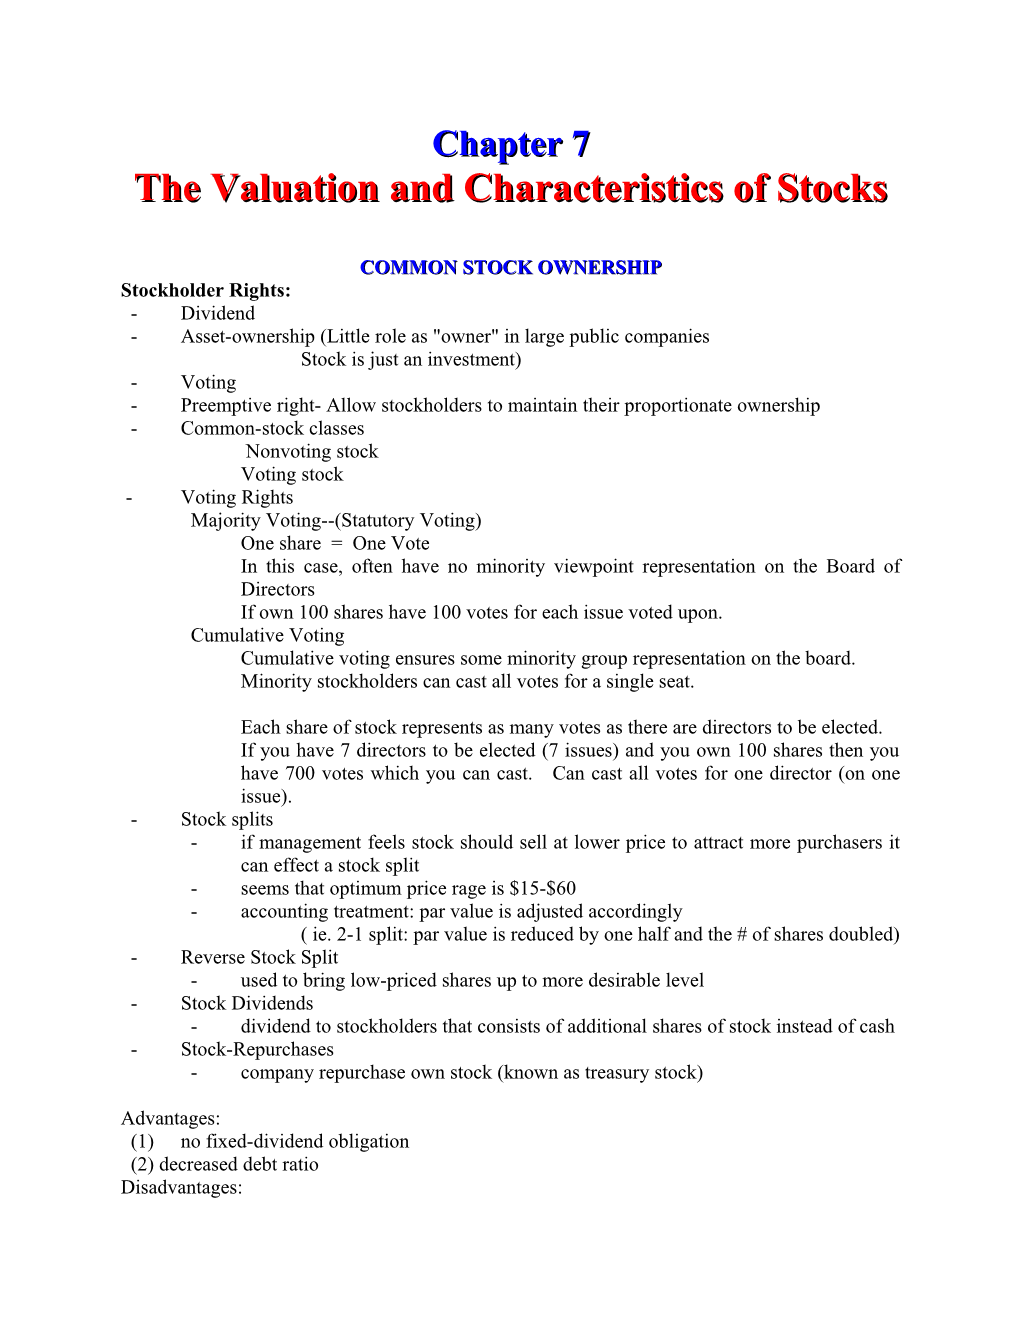 The Valuation and Characteristics of Stocks